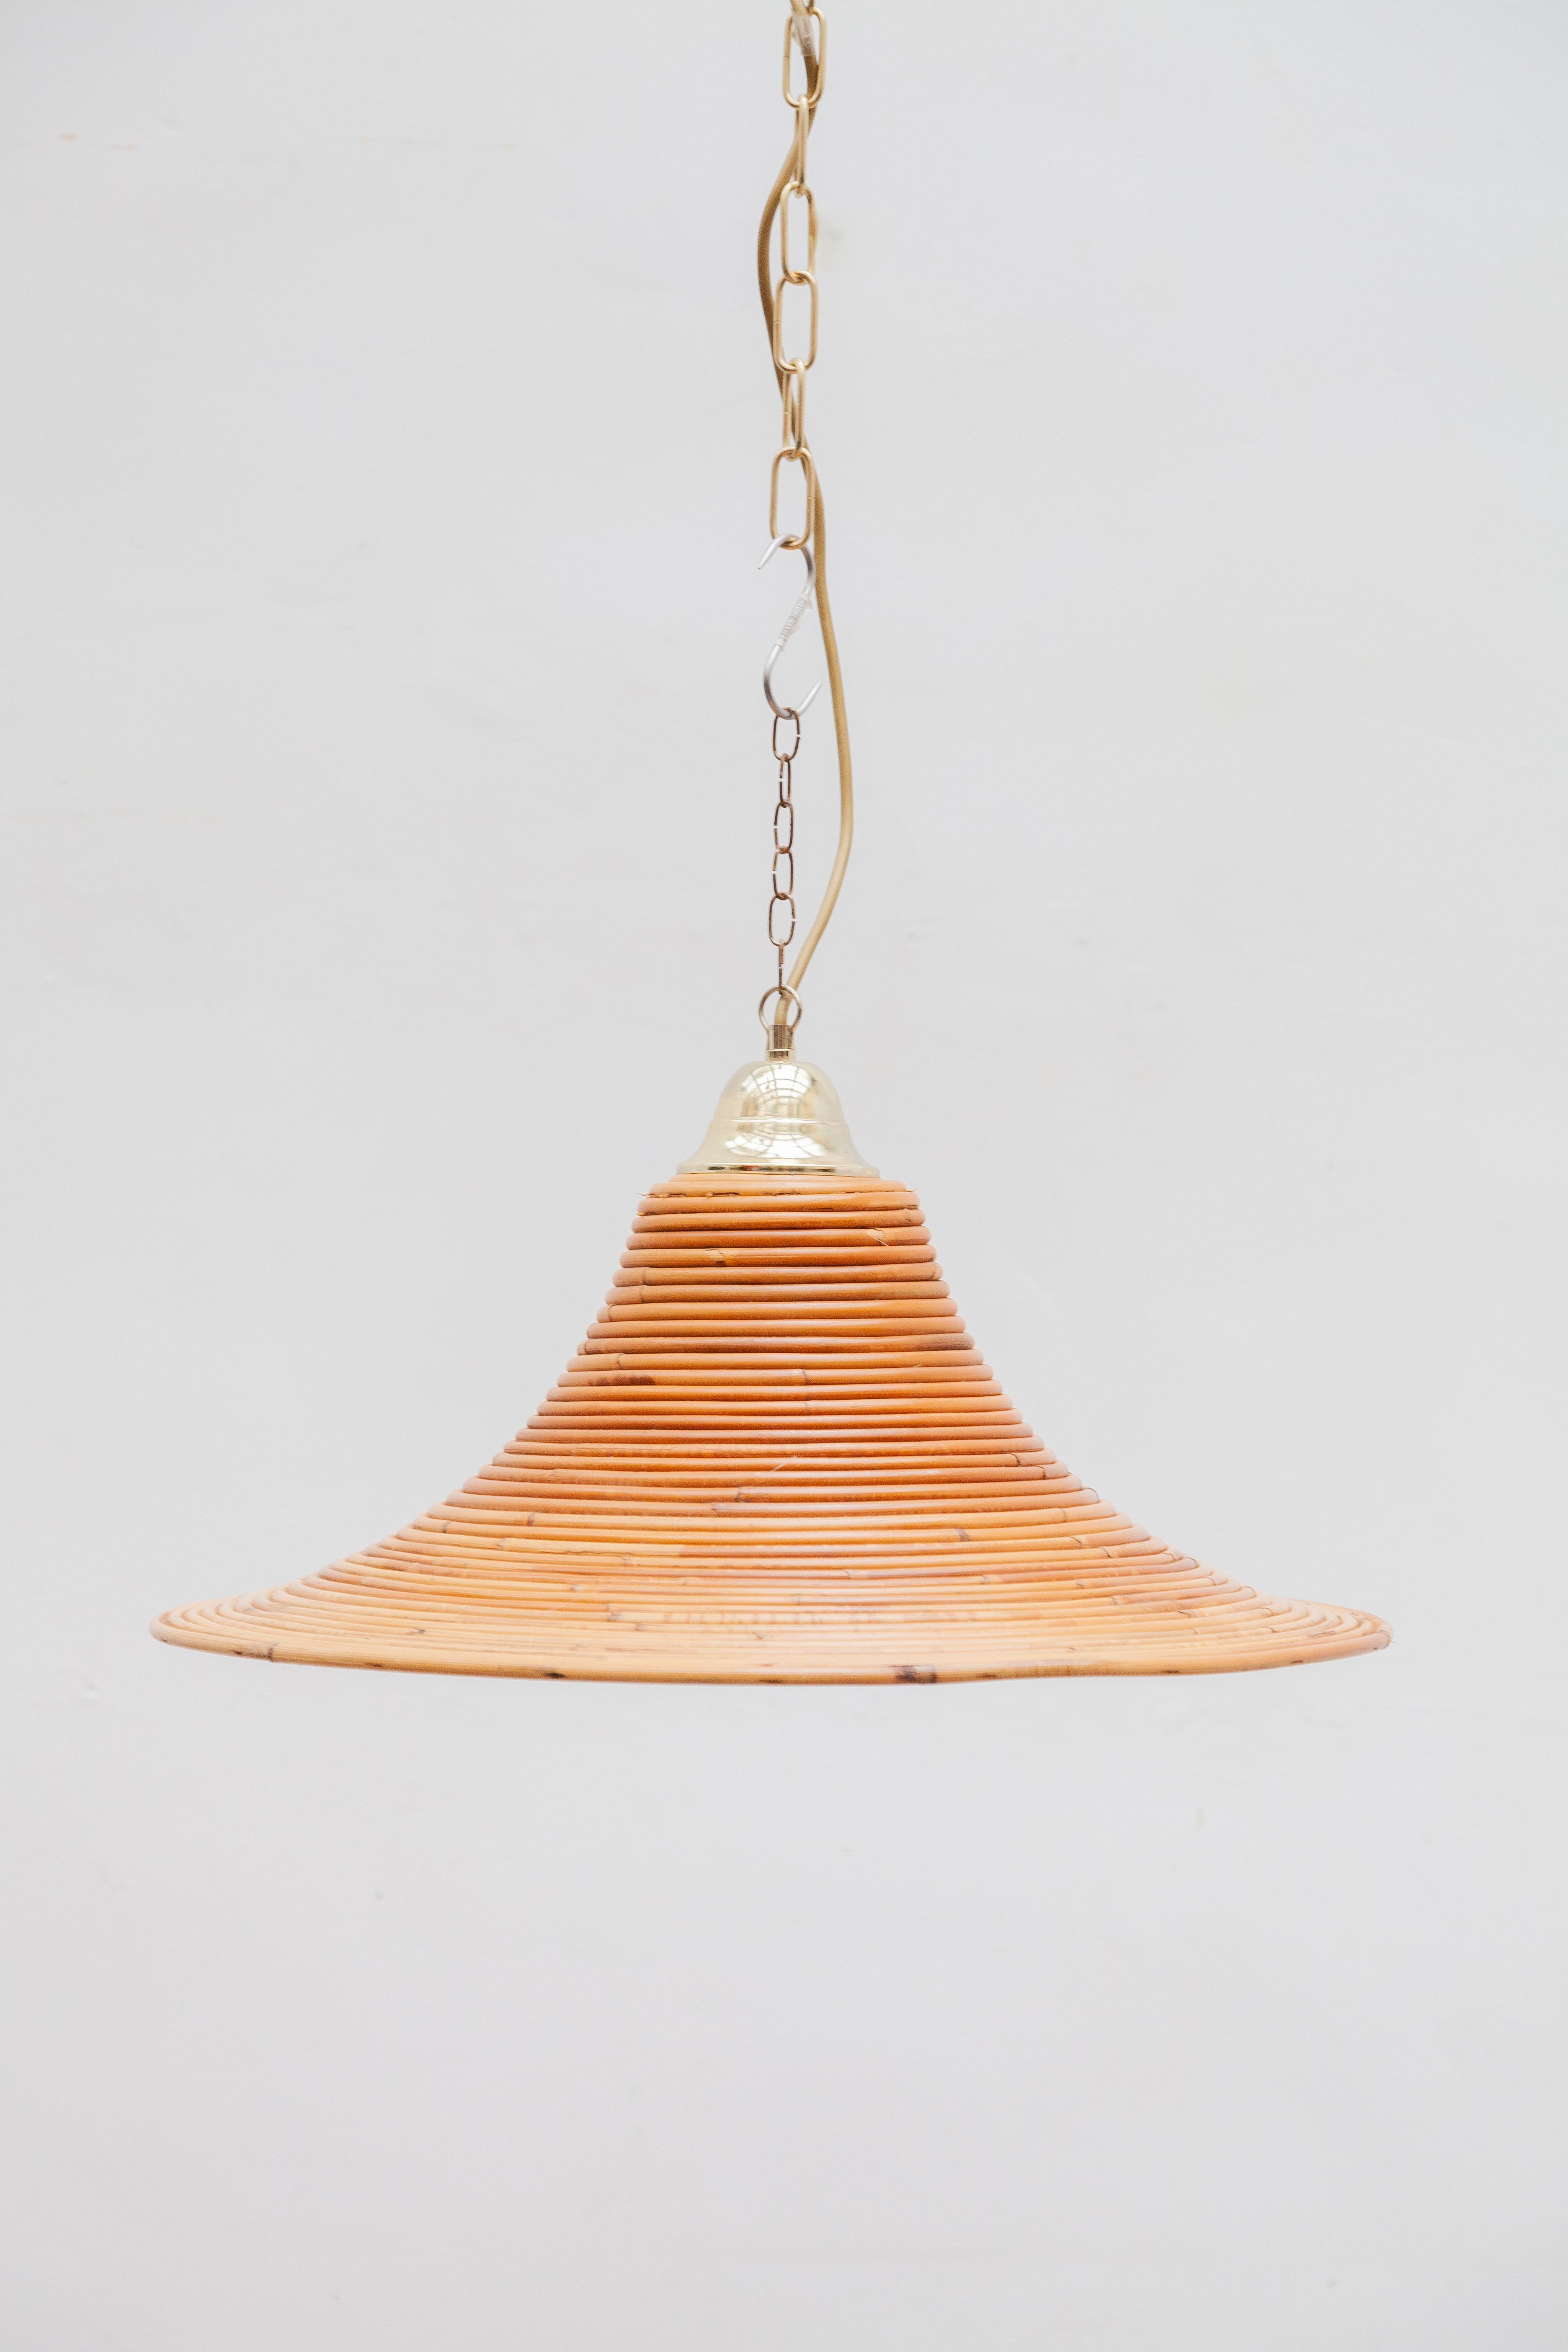 Stylish vintage bamboo hanging lamp from 1970s in the style of Gabriella Crespi. Very good vintage condition, patina consistent with use and age. Ready to furnish your home or beach house!